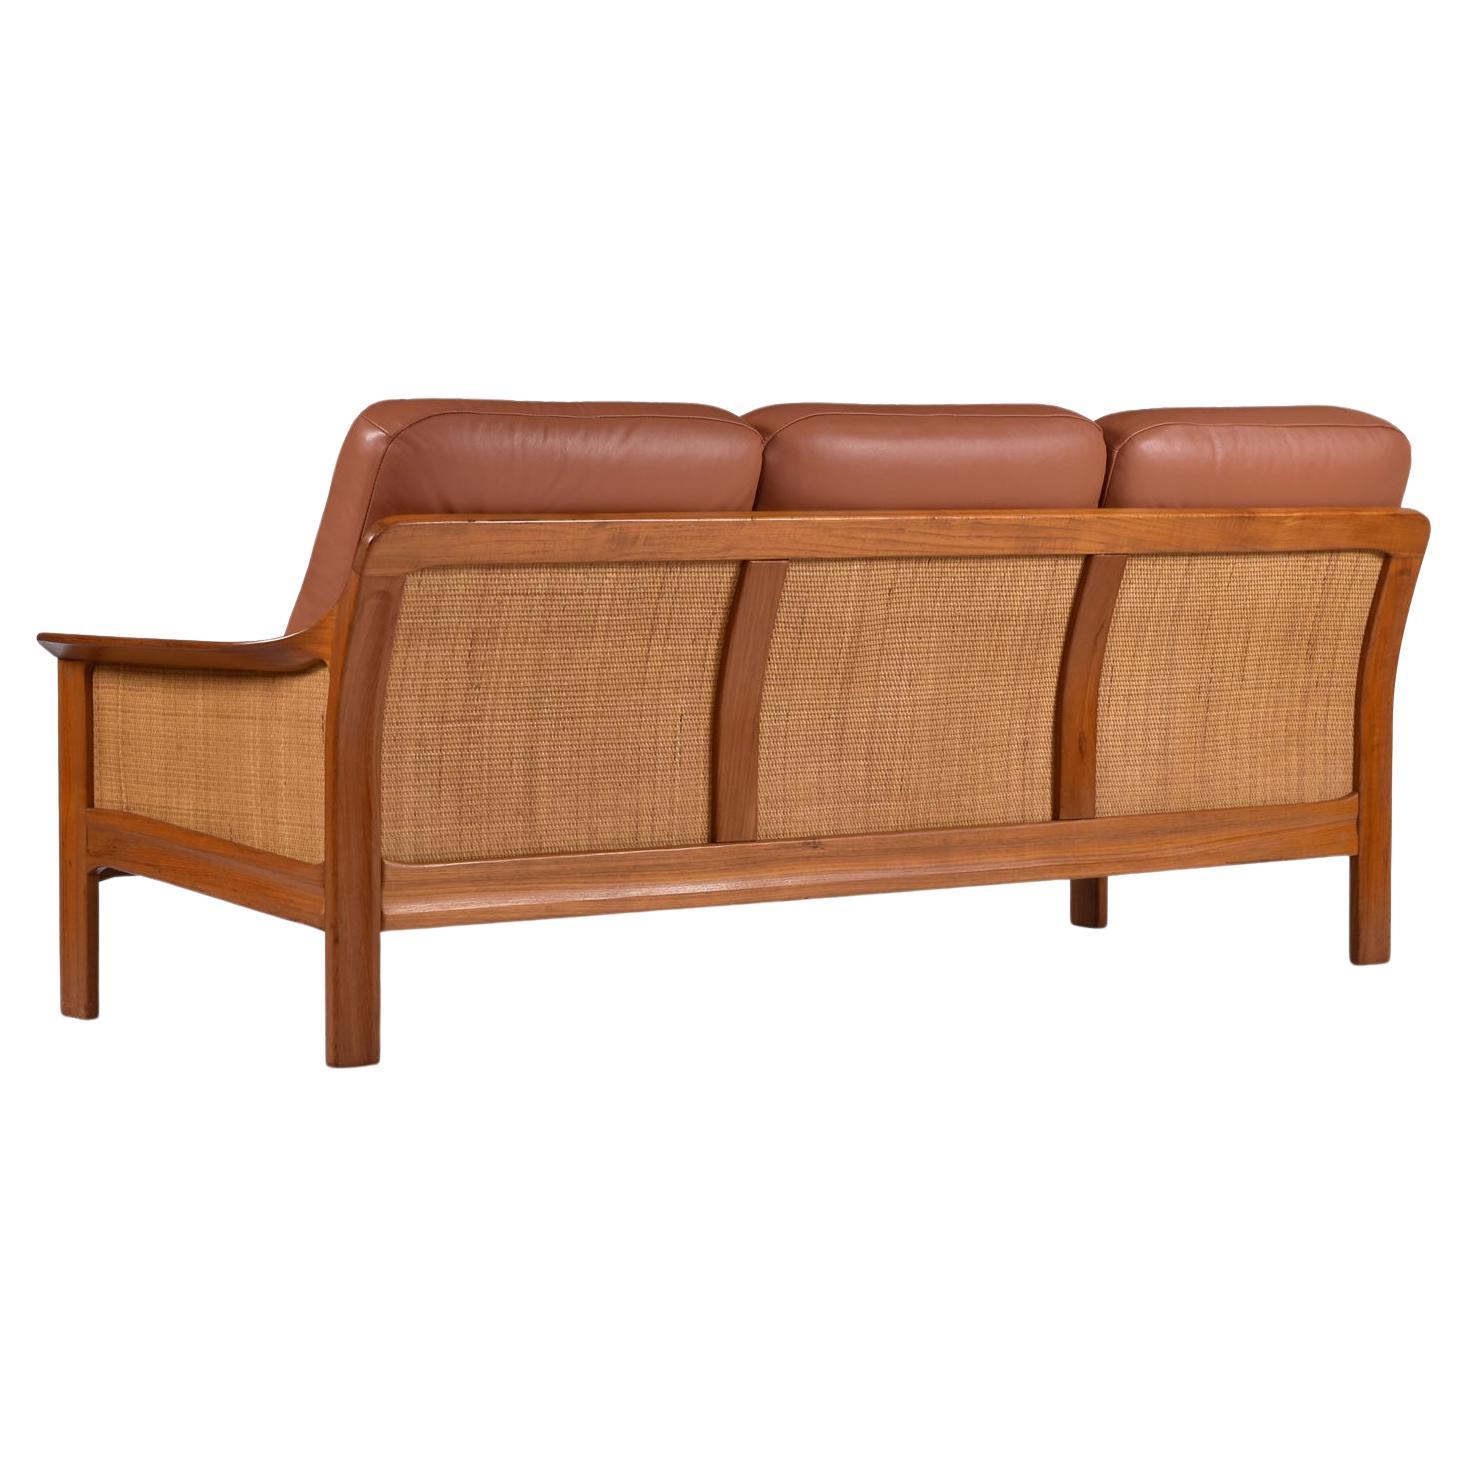 Although not marked by the maker, this exceptional, vintage (late 1970s / early 1980s) solid teak sofa has a distinctive Danish modern design but may actually be Canadian. The sofa feature 3-panels of woven reed cane that cover the sides and backs.